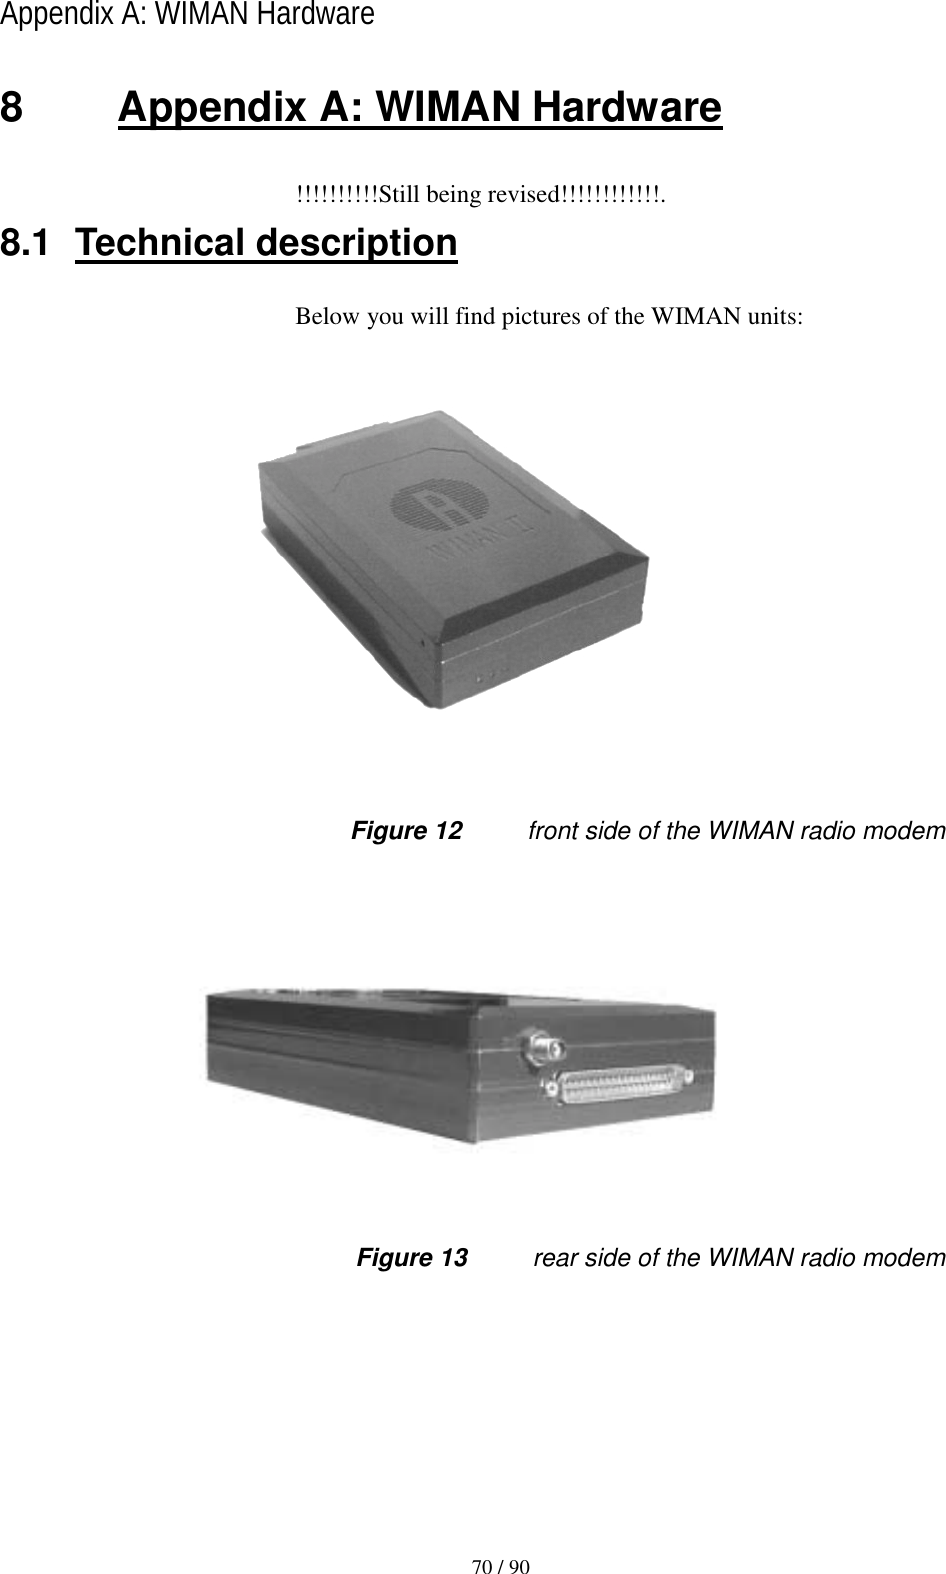   70 / 90 Appendix A: WIMAN Hardware 8  Appendix A: WIMAN Hardware !!!!!!!!!!Still being revised!!!!!!!!!!!!. 8.1 Technical description Below you will find pictures of the WIMAN units:  Figure 12  front side of the WIMAN radio modem  Figure 13  rear side of the WIMAN radio modem 